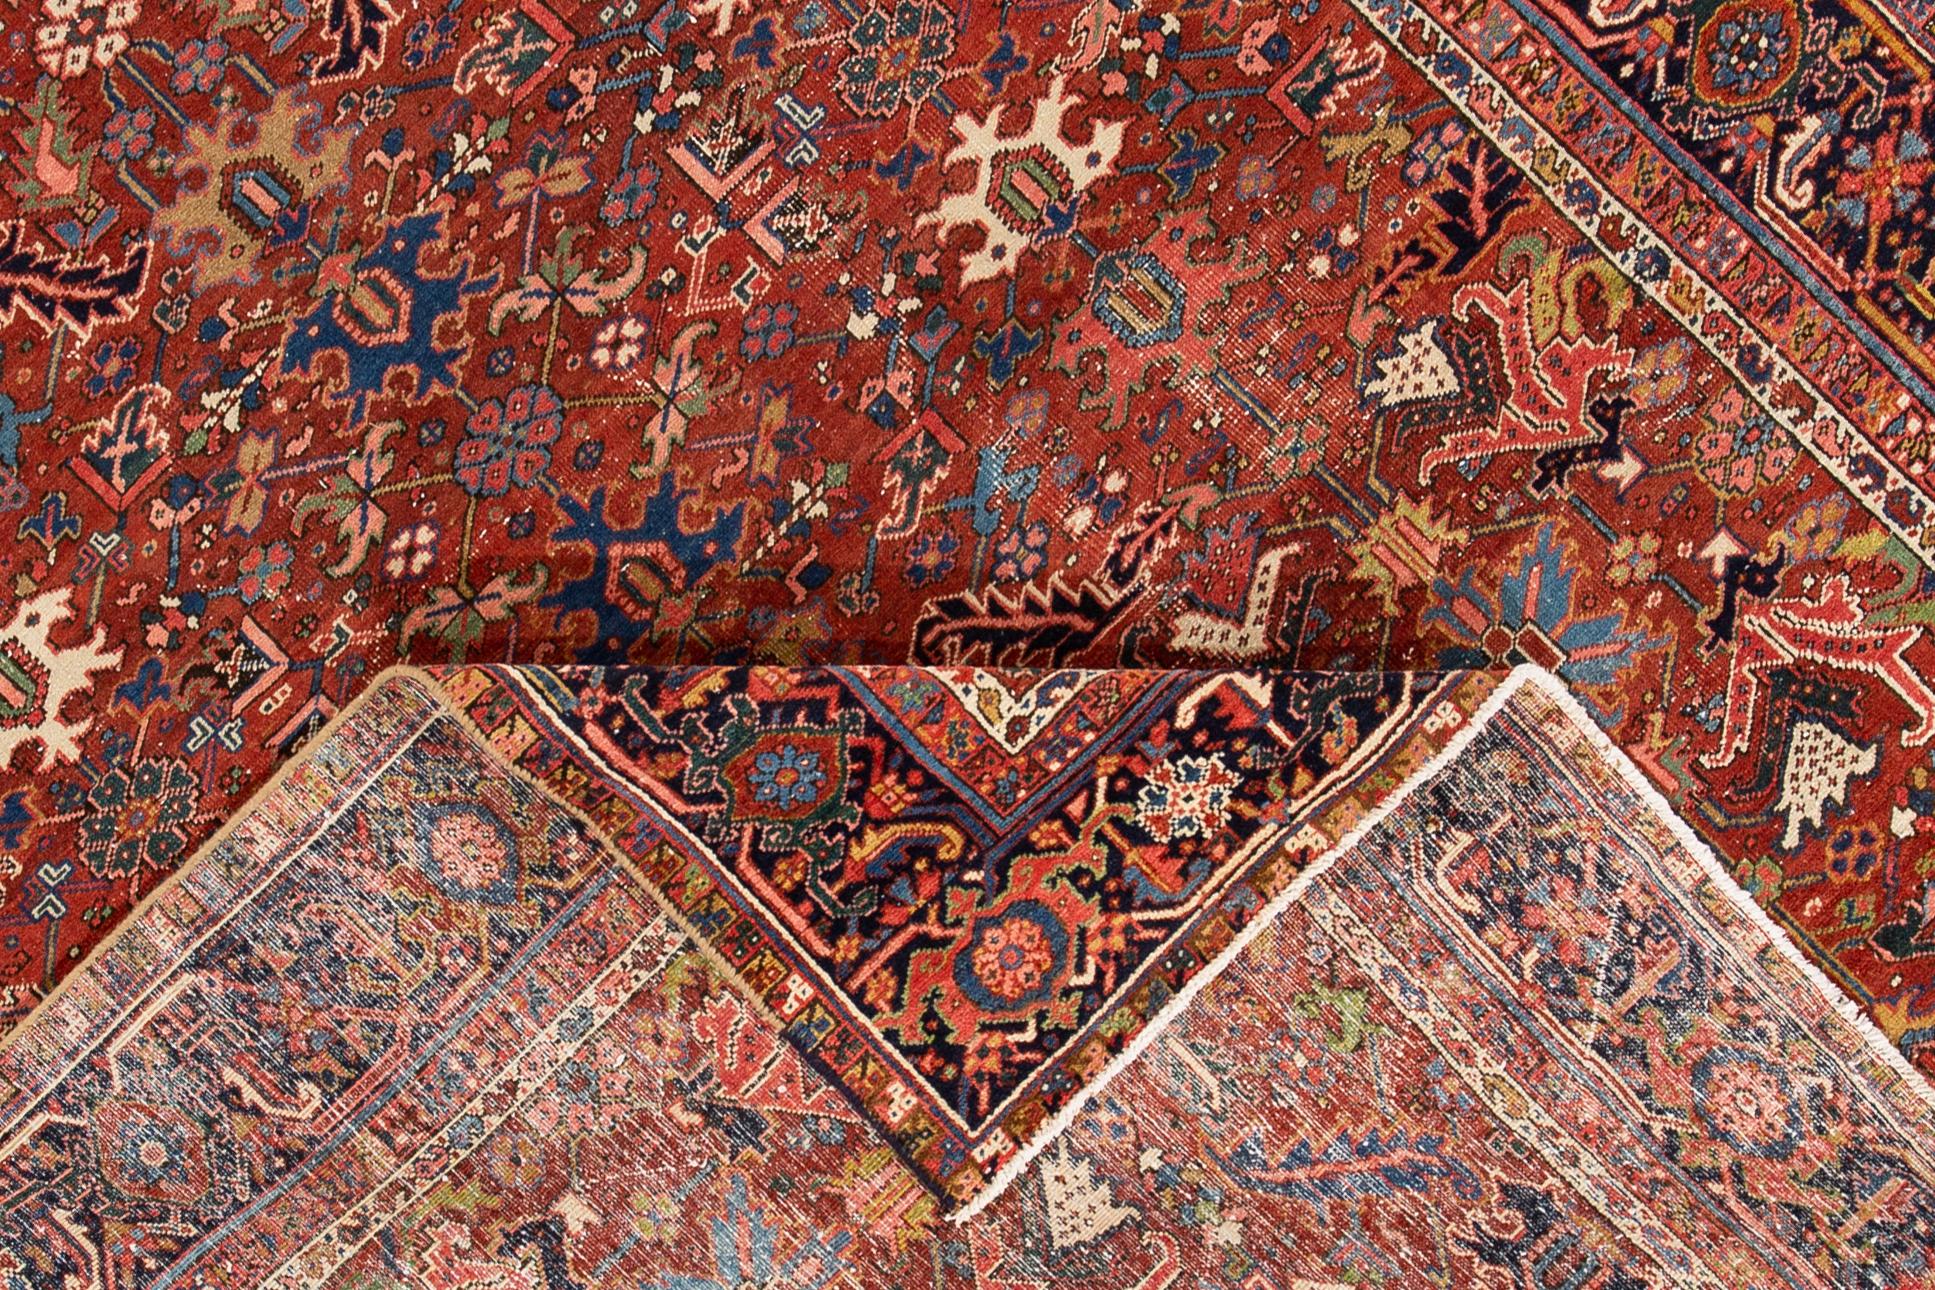 Beautiful hand knotted vintage Persian Heriz wool rug. This rug has a red field with an all-over multicolored floral design,

circa 1920

This rug measures 7' 6